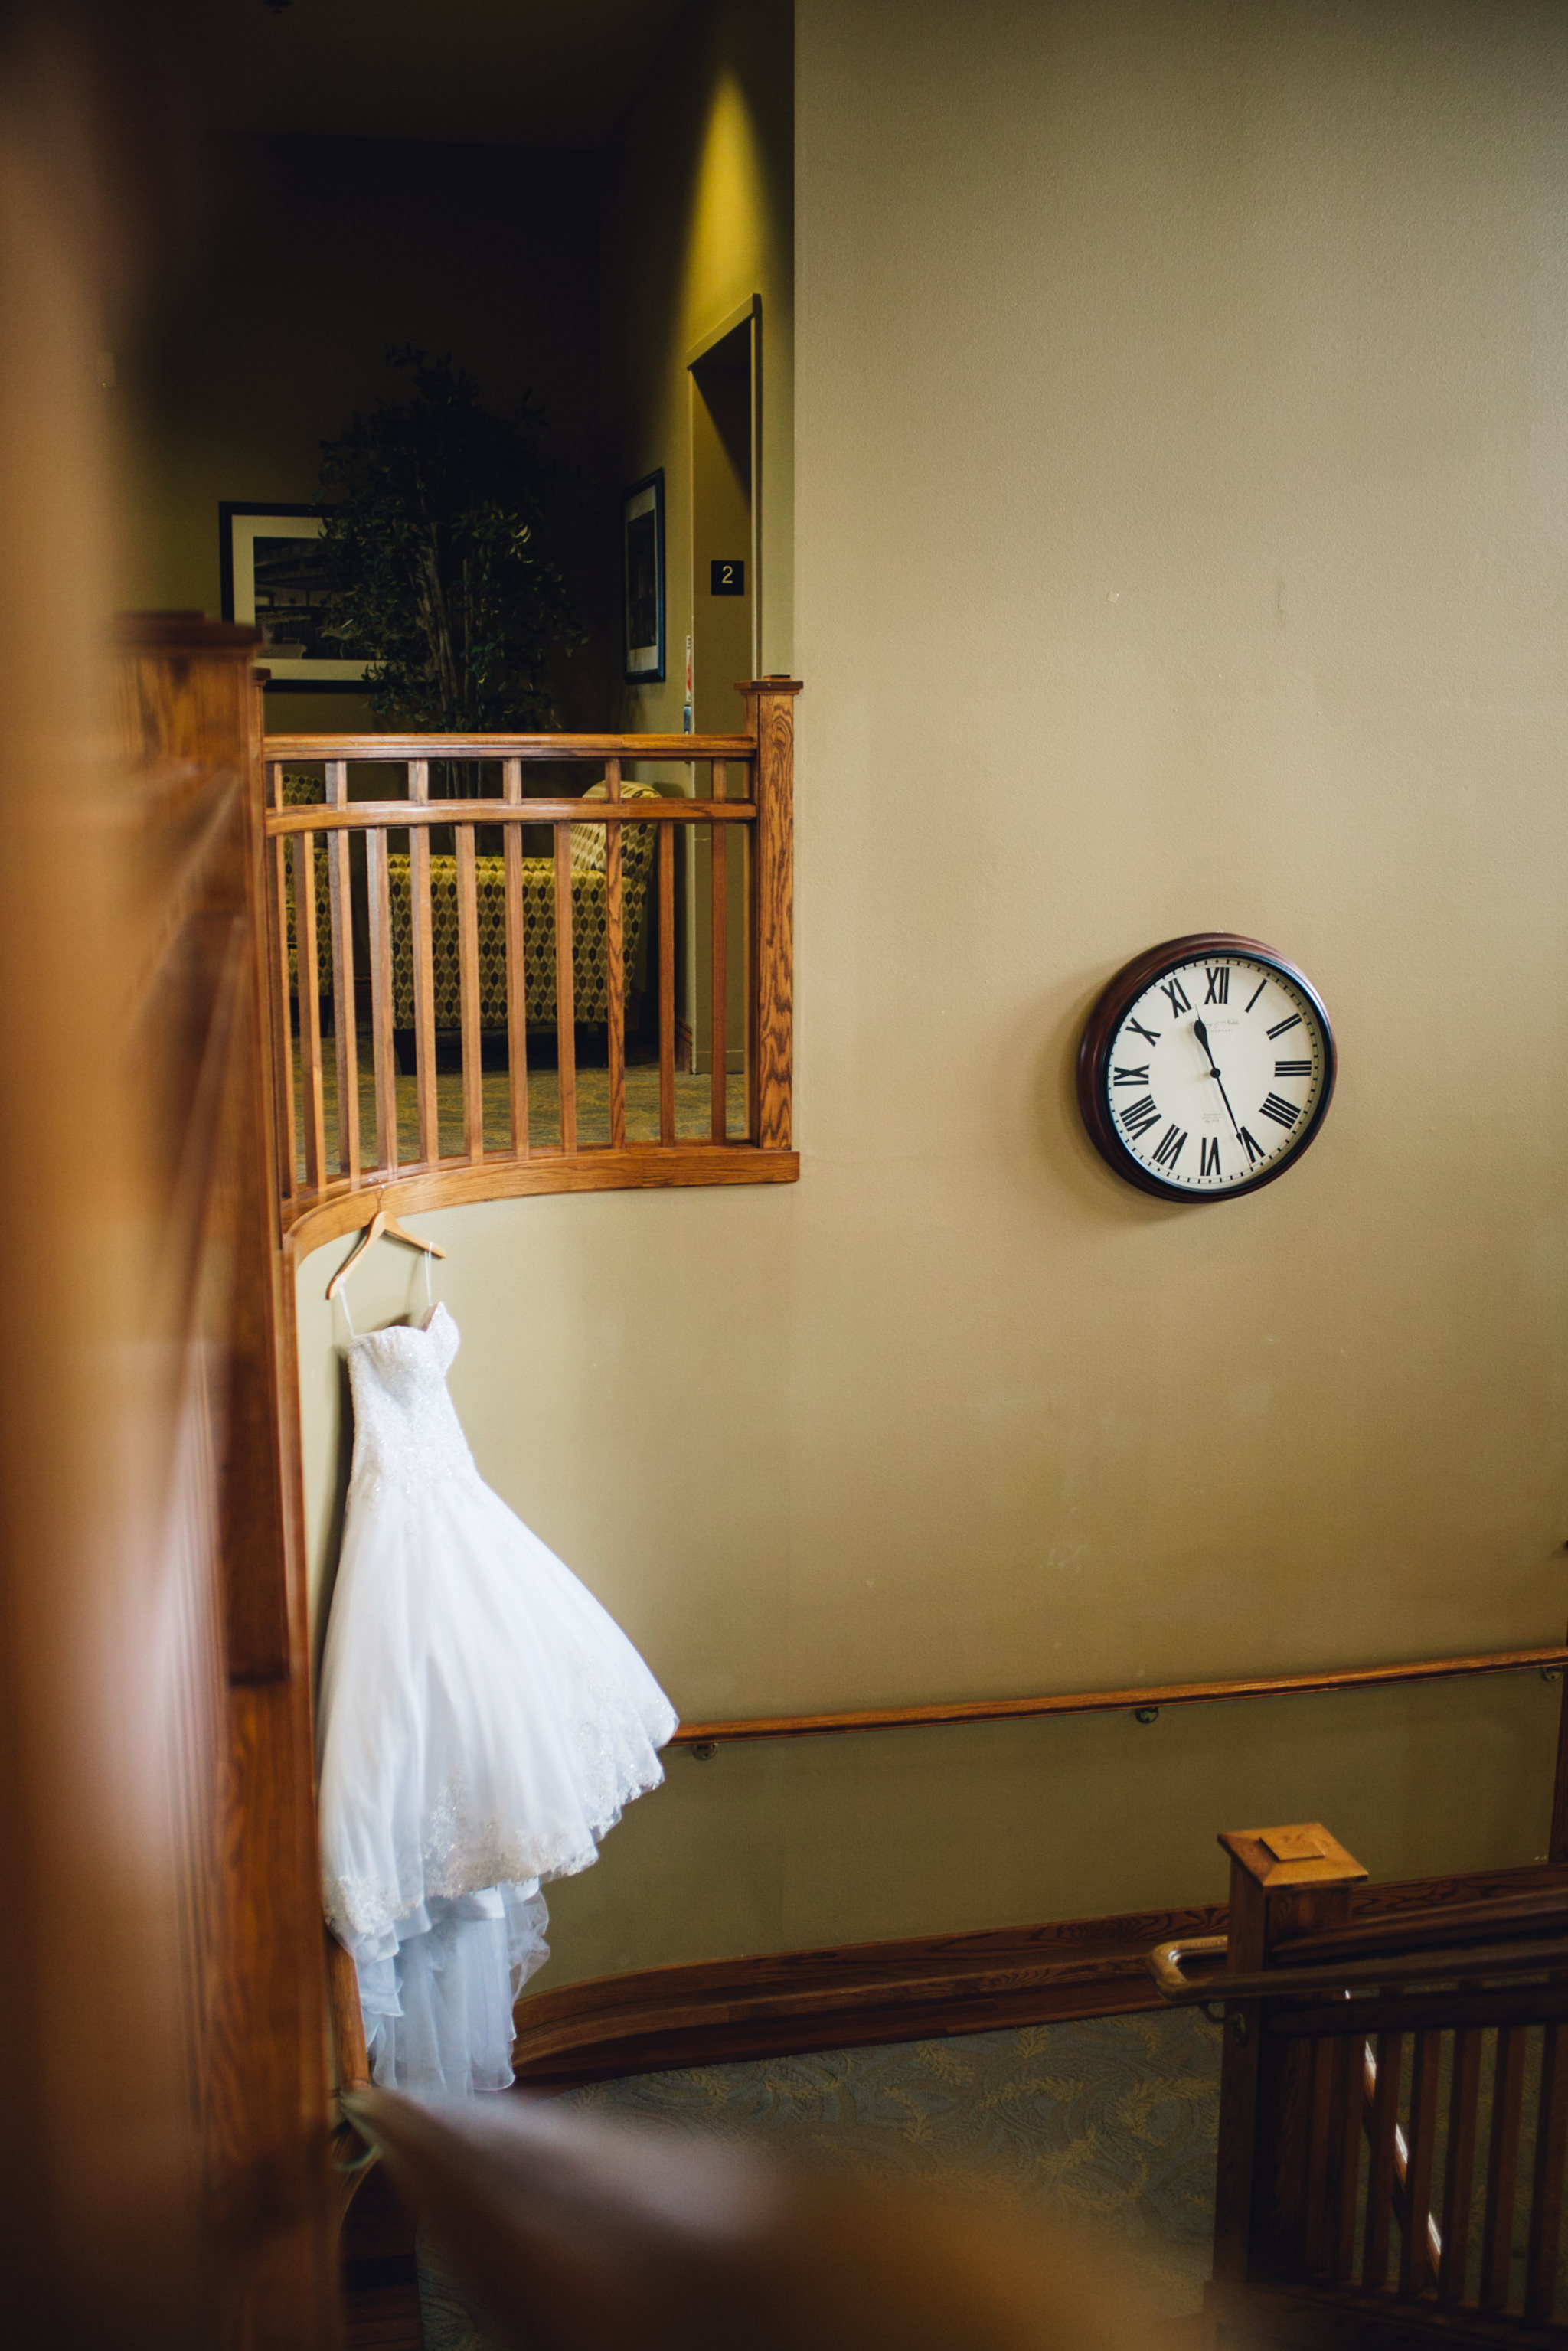 Rogue Valley Country Club Wedding